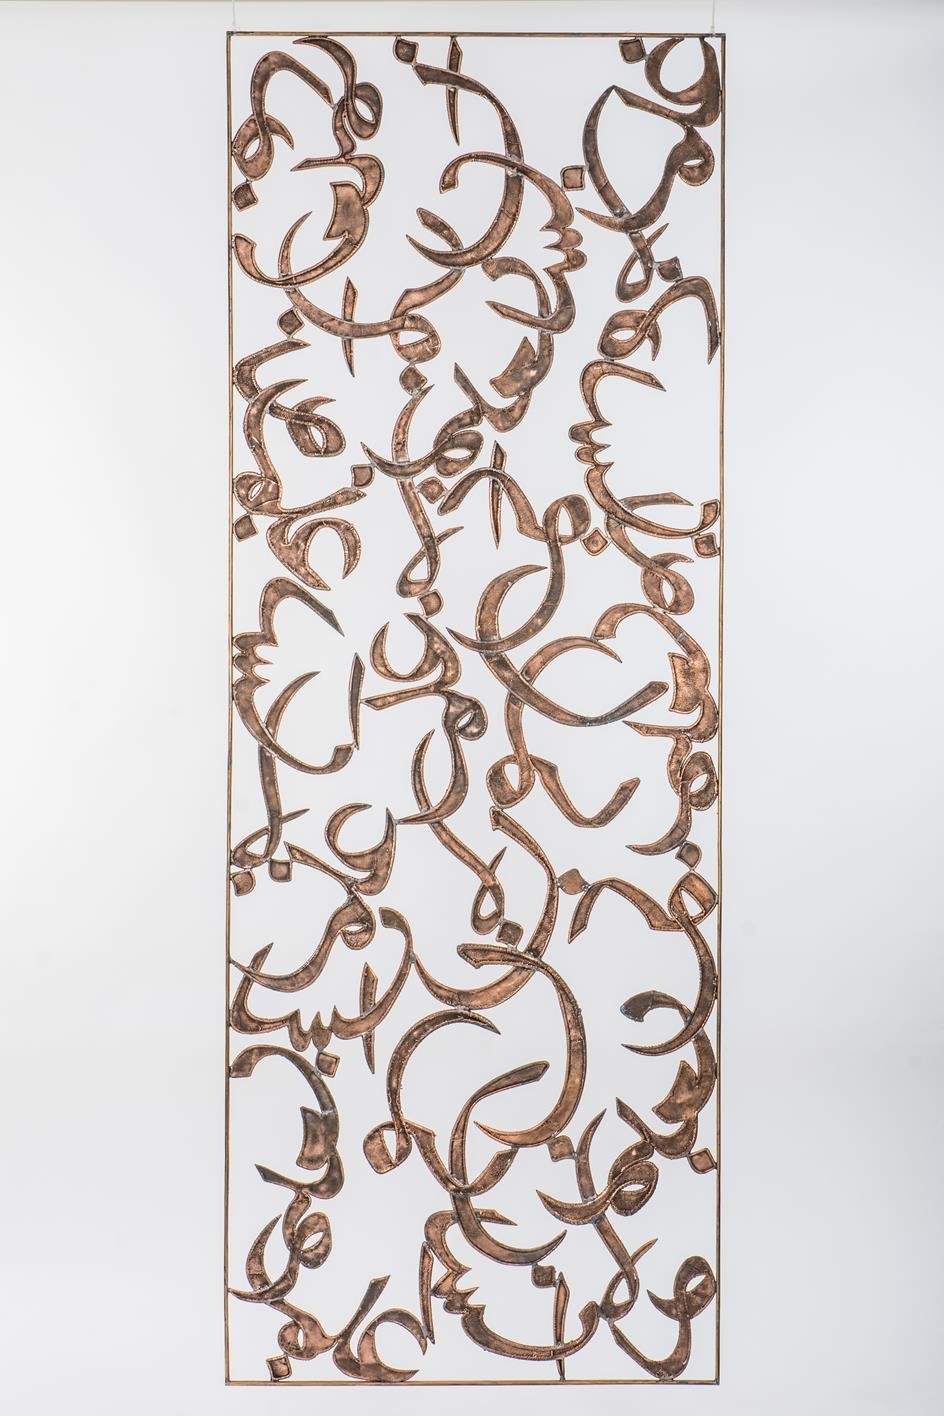 Perforated Scroll IV, 2018 | Copper, 96x35x2in